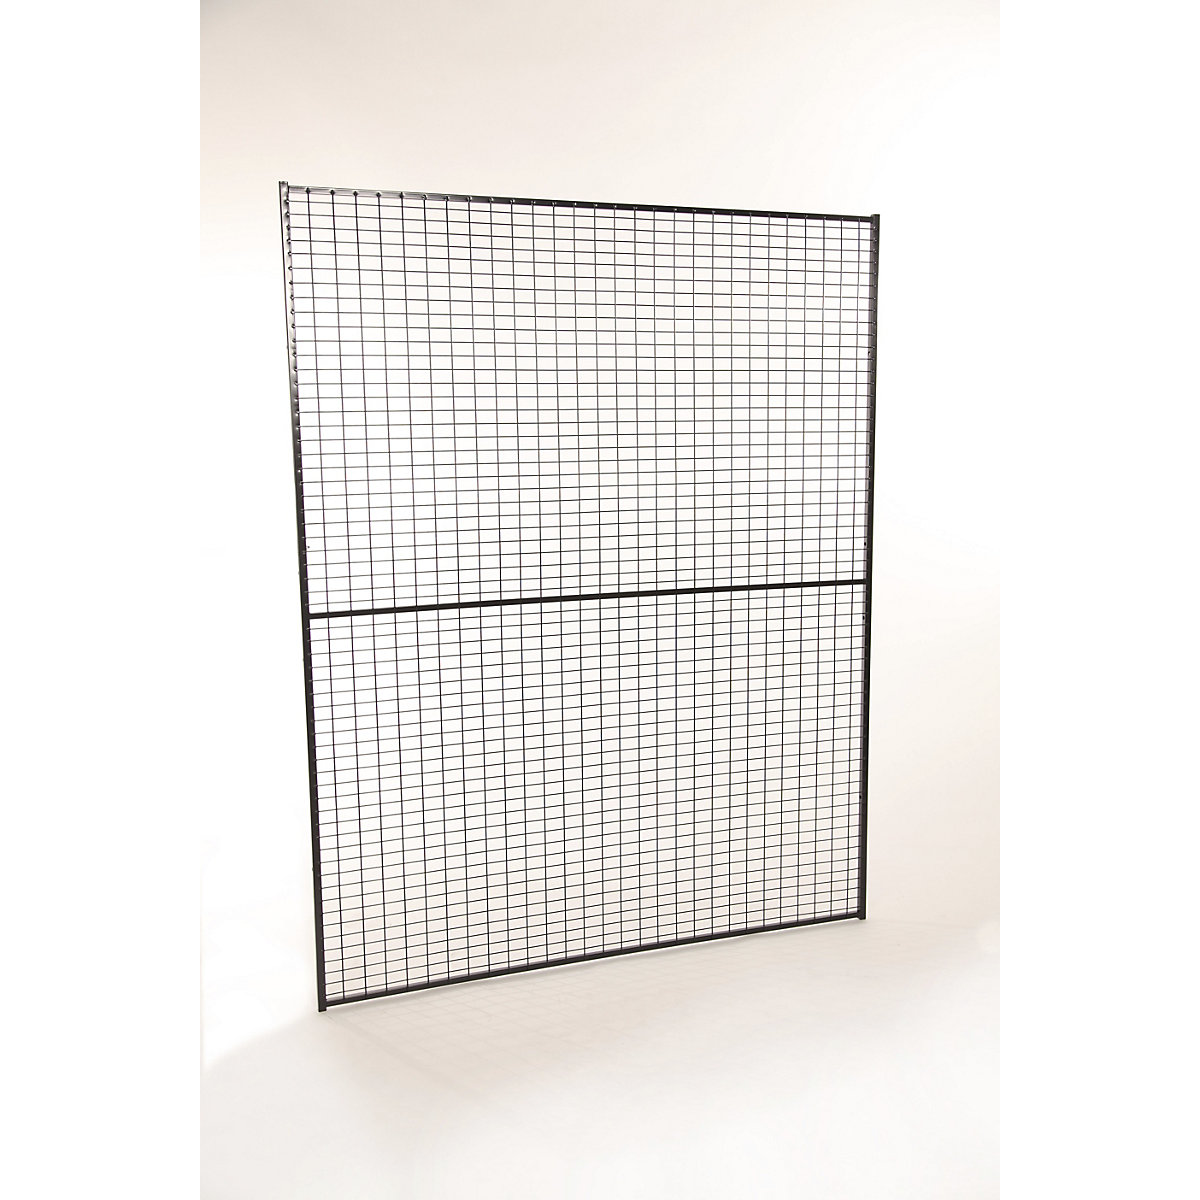 X-GUARD LITE machine protective fencing, wall section – Axelent, height 2200 mm, width 1300 mm-12